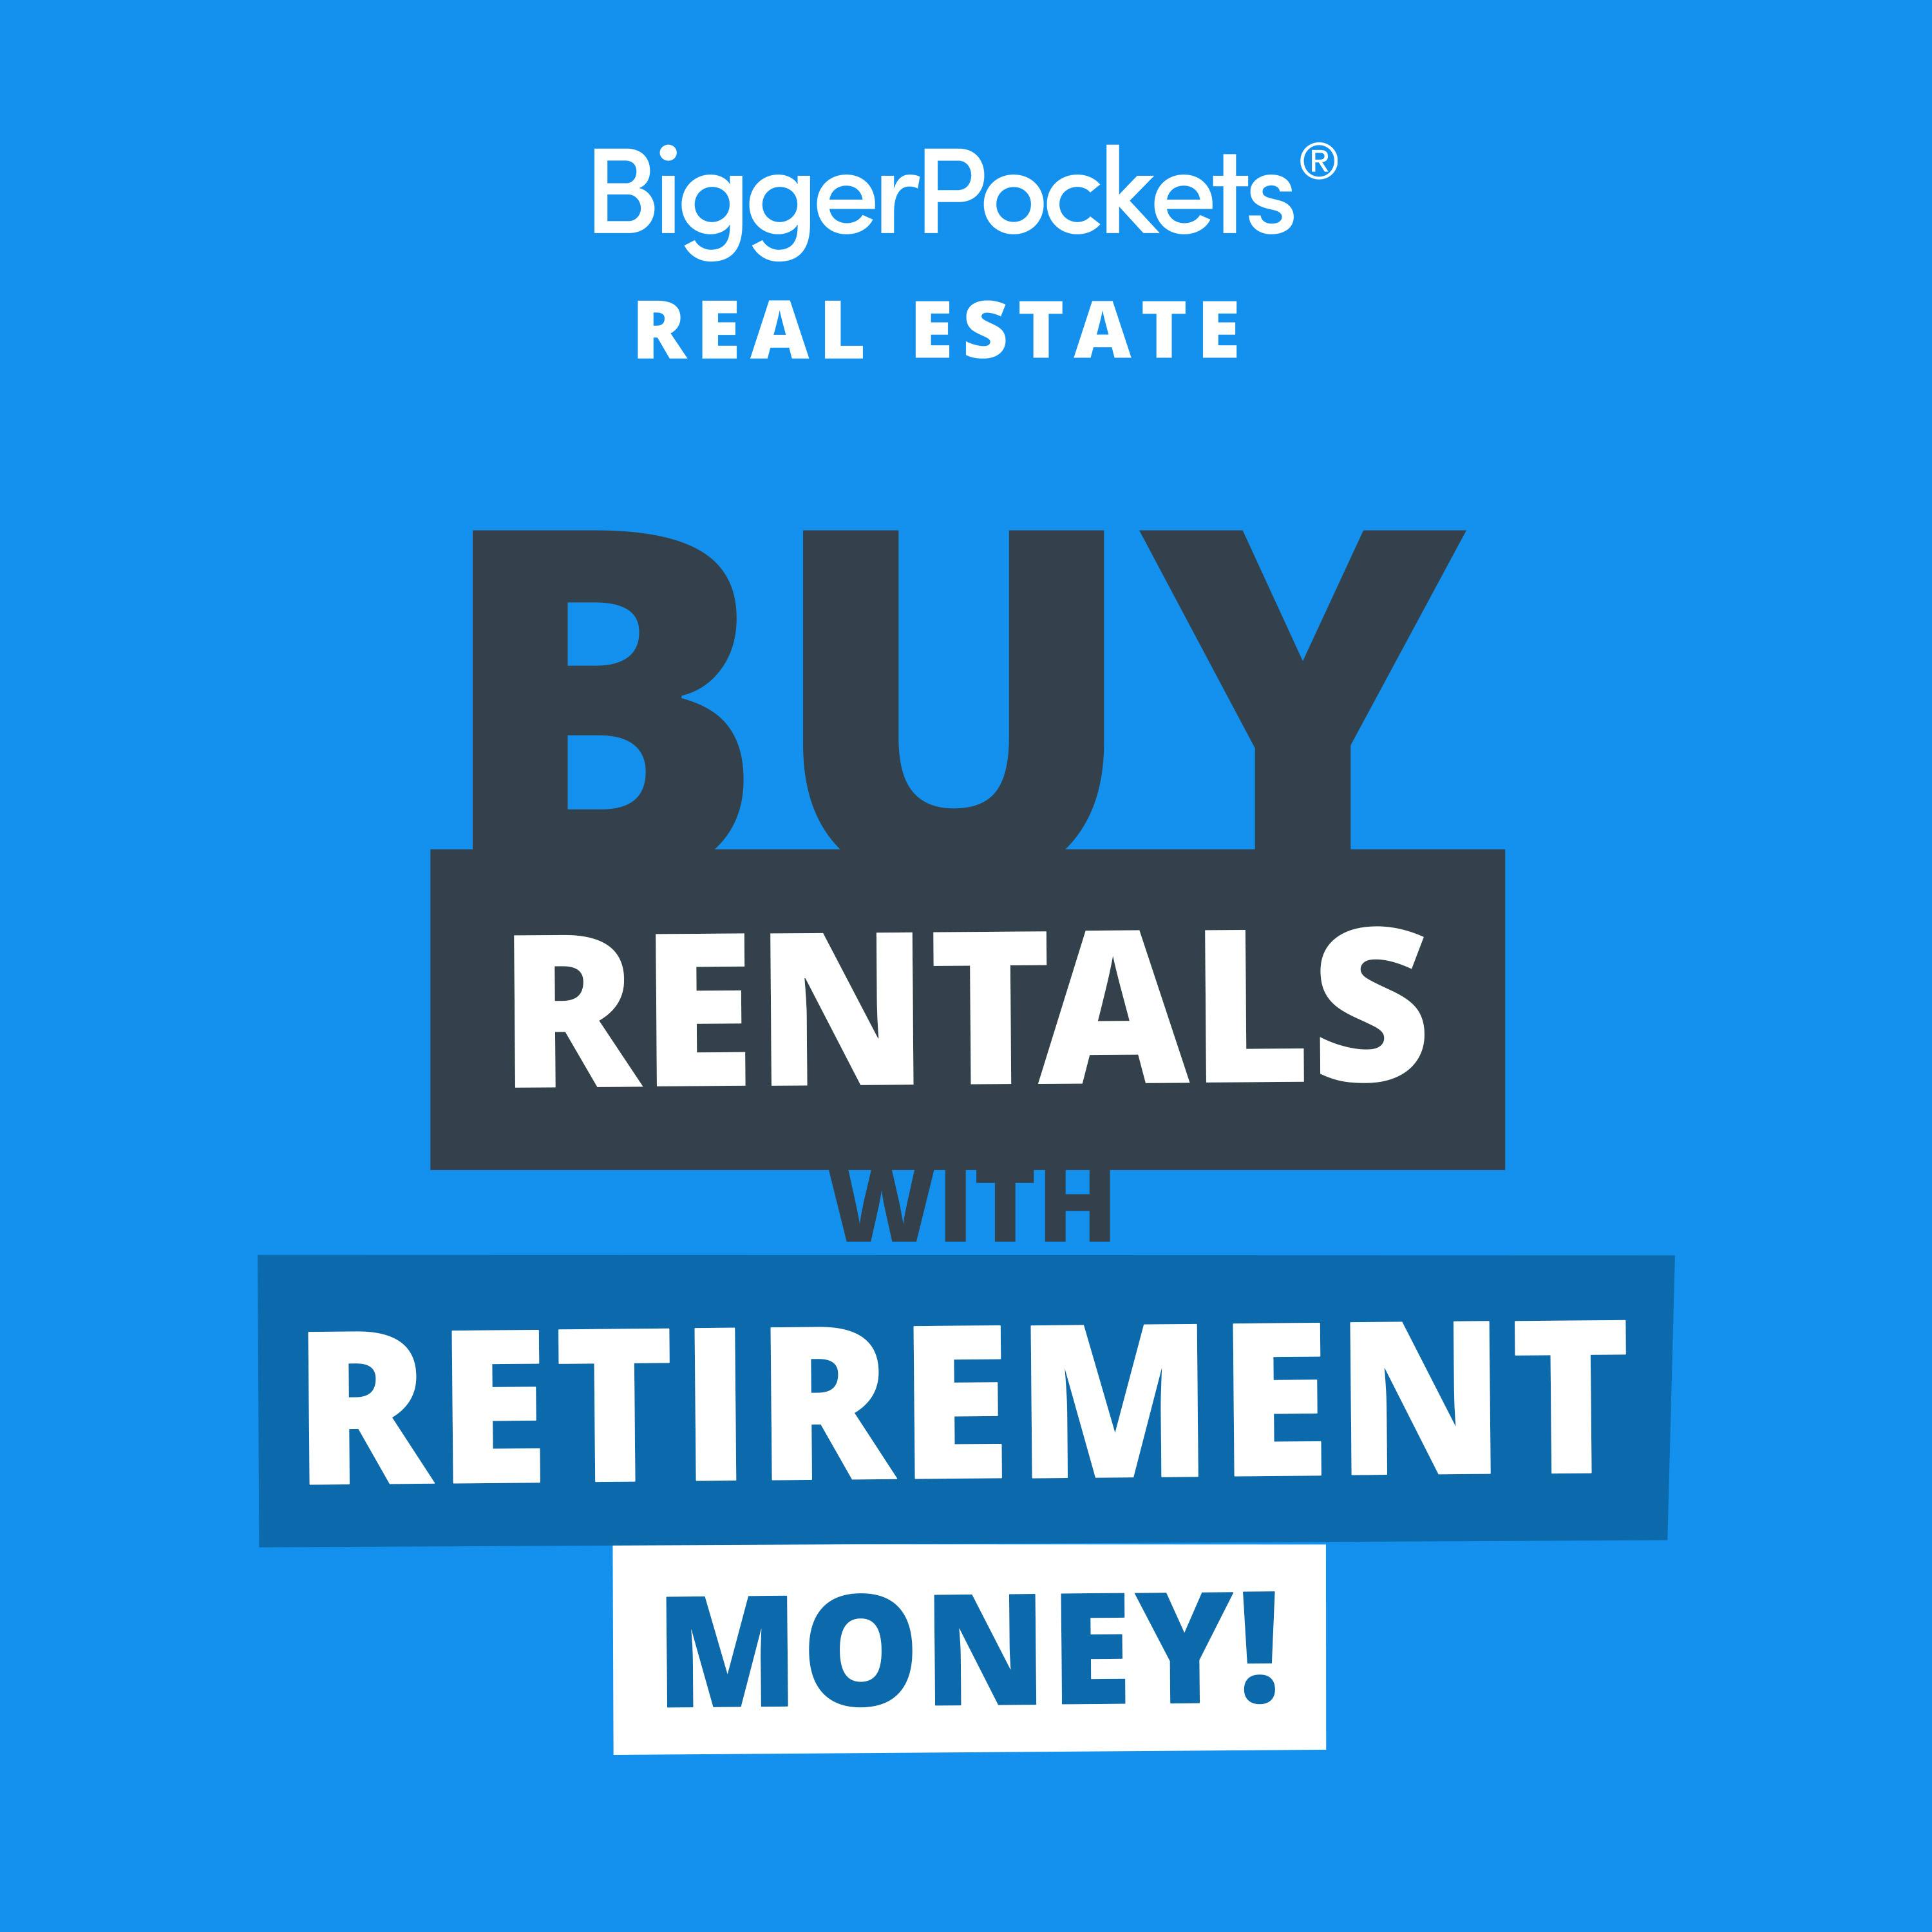 770: Retirement Accounts Collecting Dust? Use Them to Buy Real Estate! w/Kaaren Hall